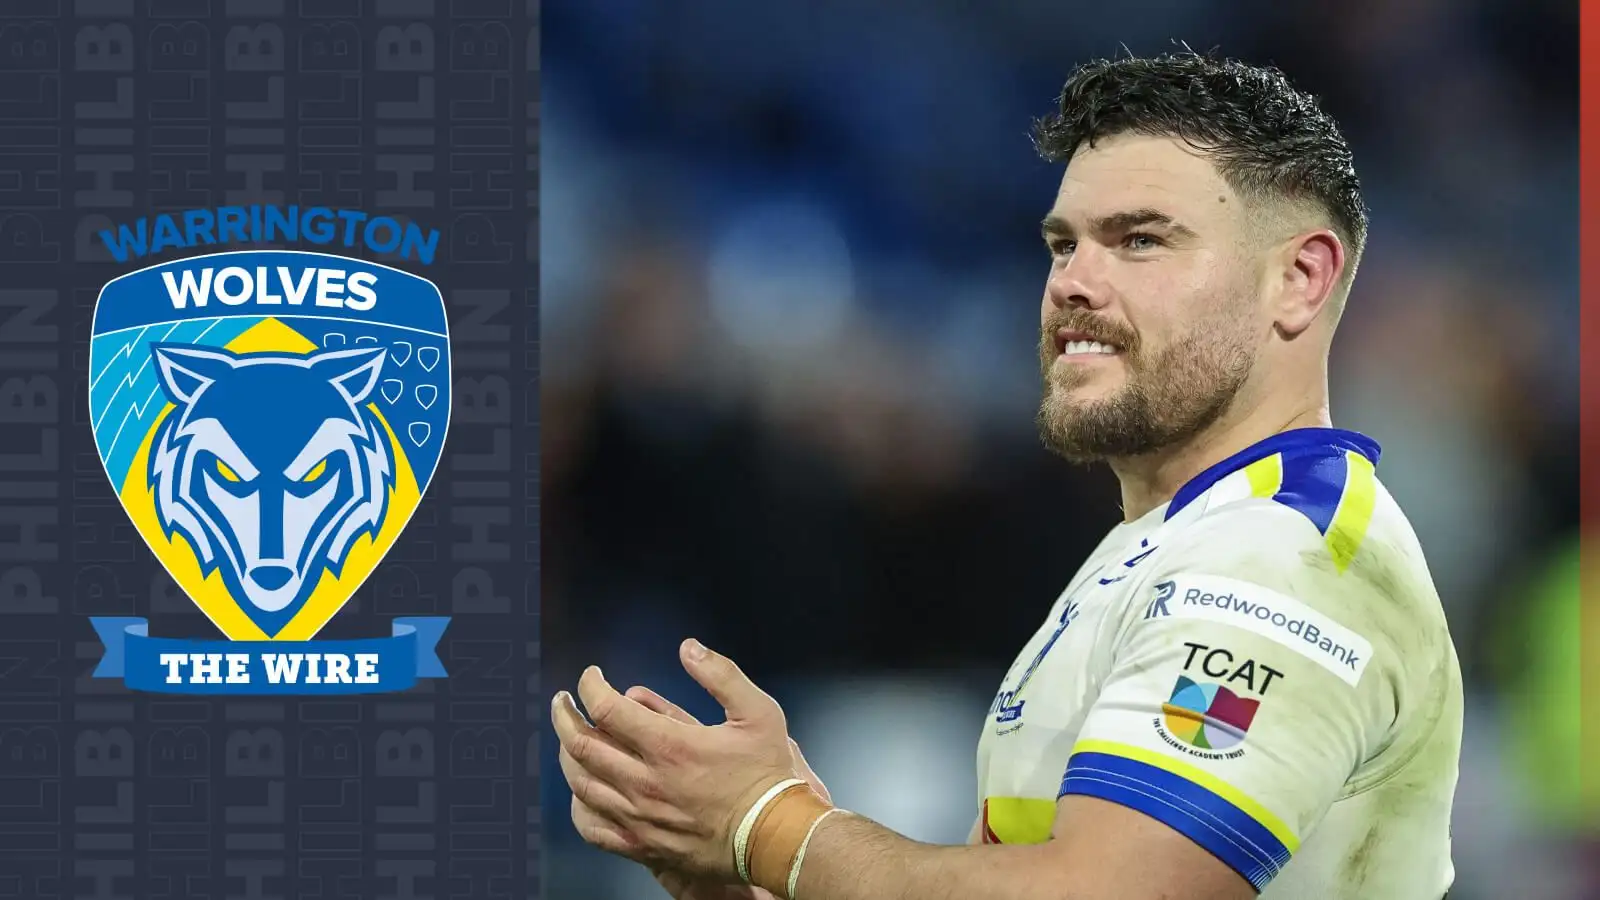 Warrington Wolves tie down hometown boy to new contract: ‘I feel at home here and I love playing for this club’